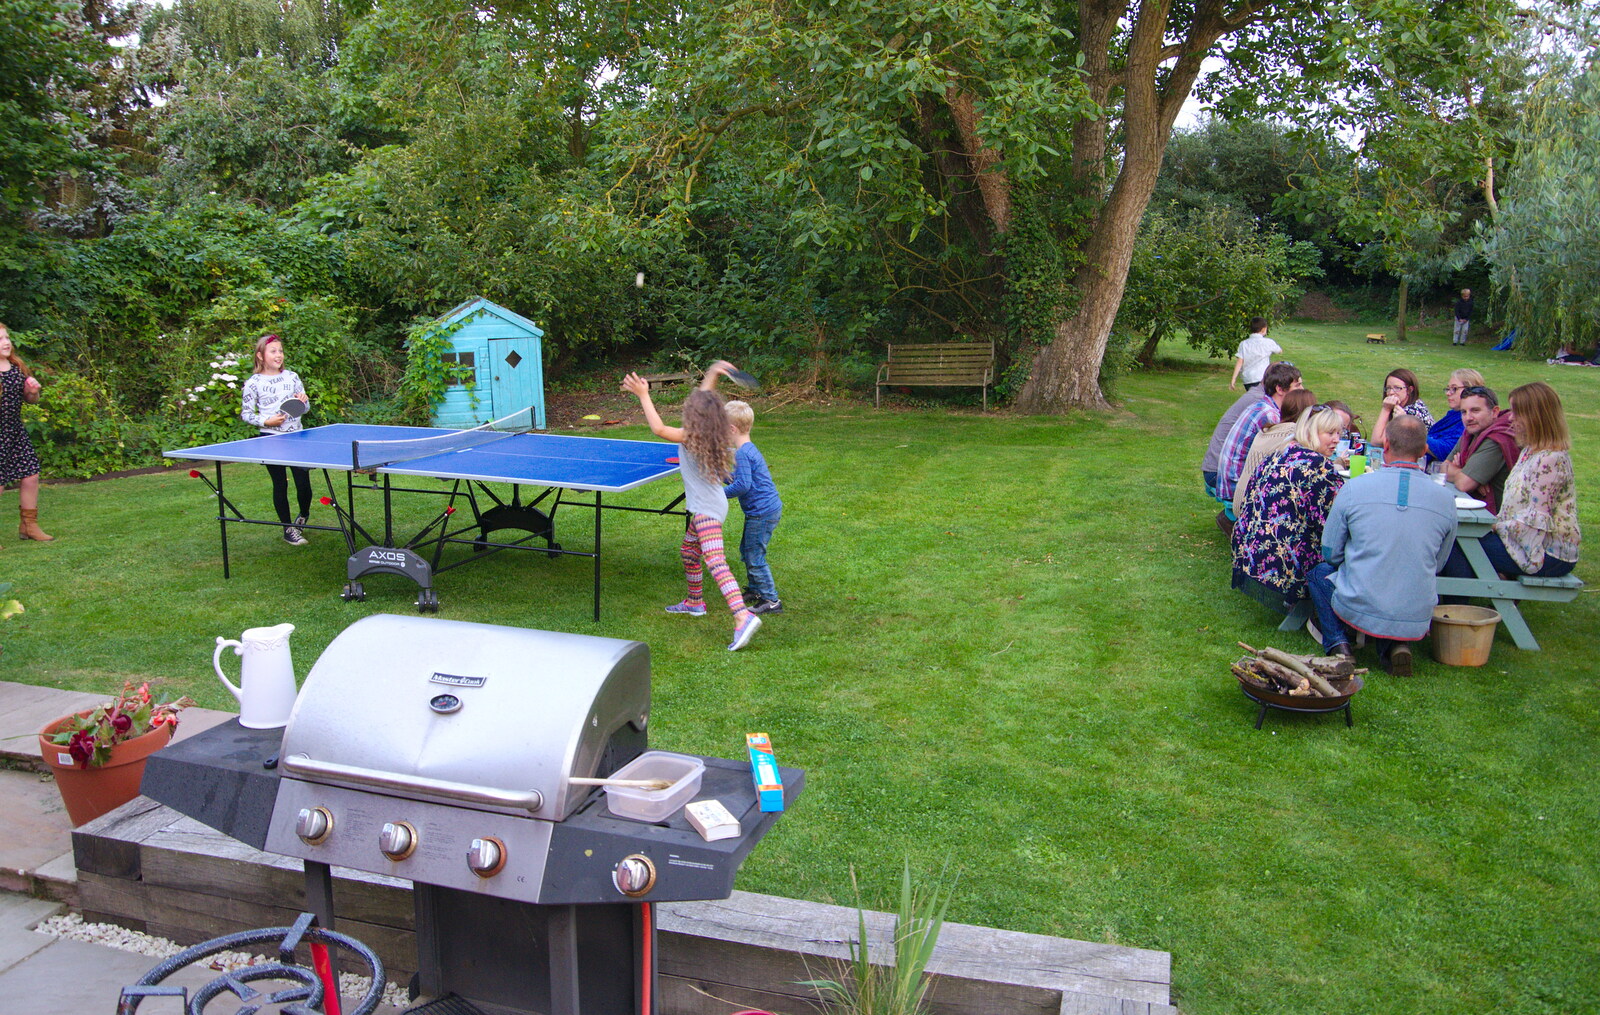 Table tennis and garden chatting from A Summer Party, Brome, Suffolk - 3rd August 2019